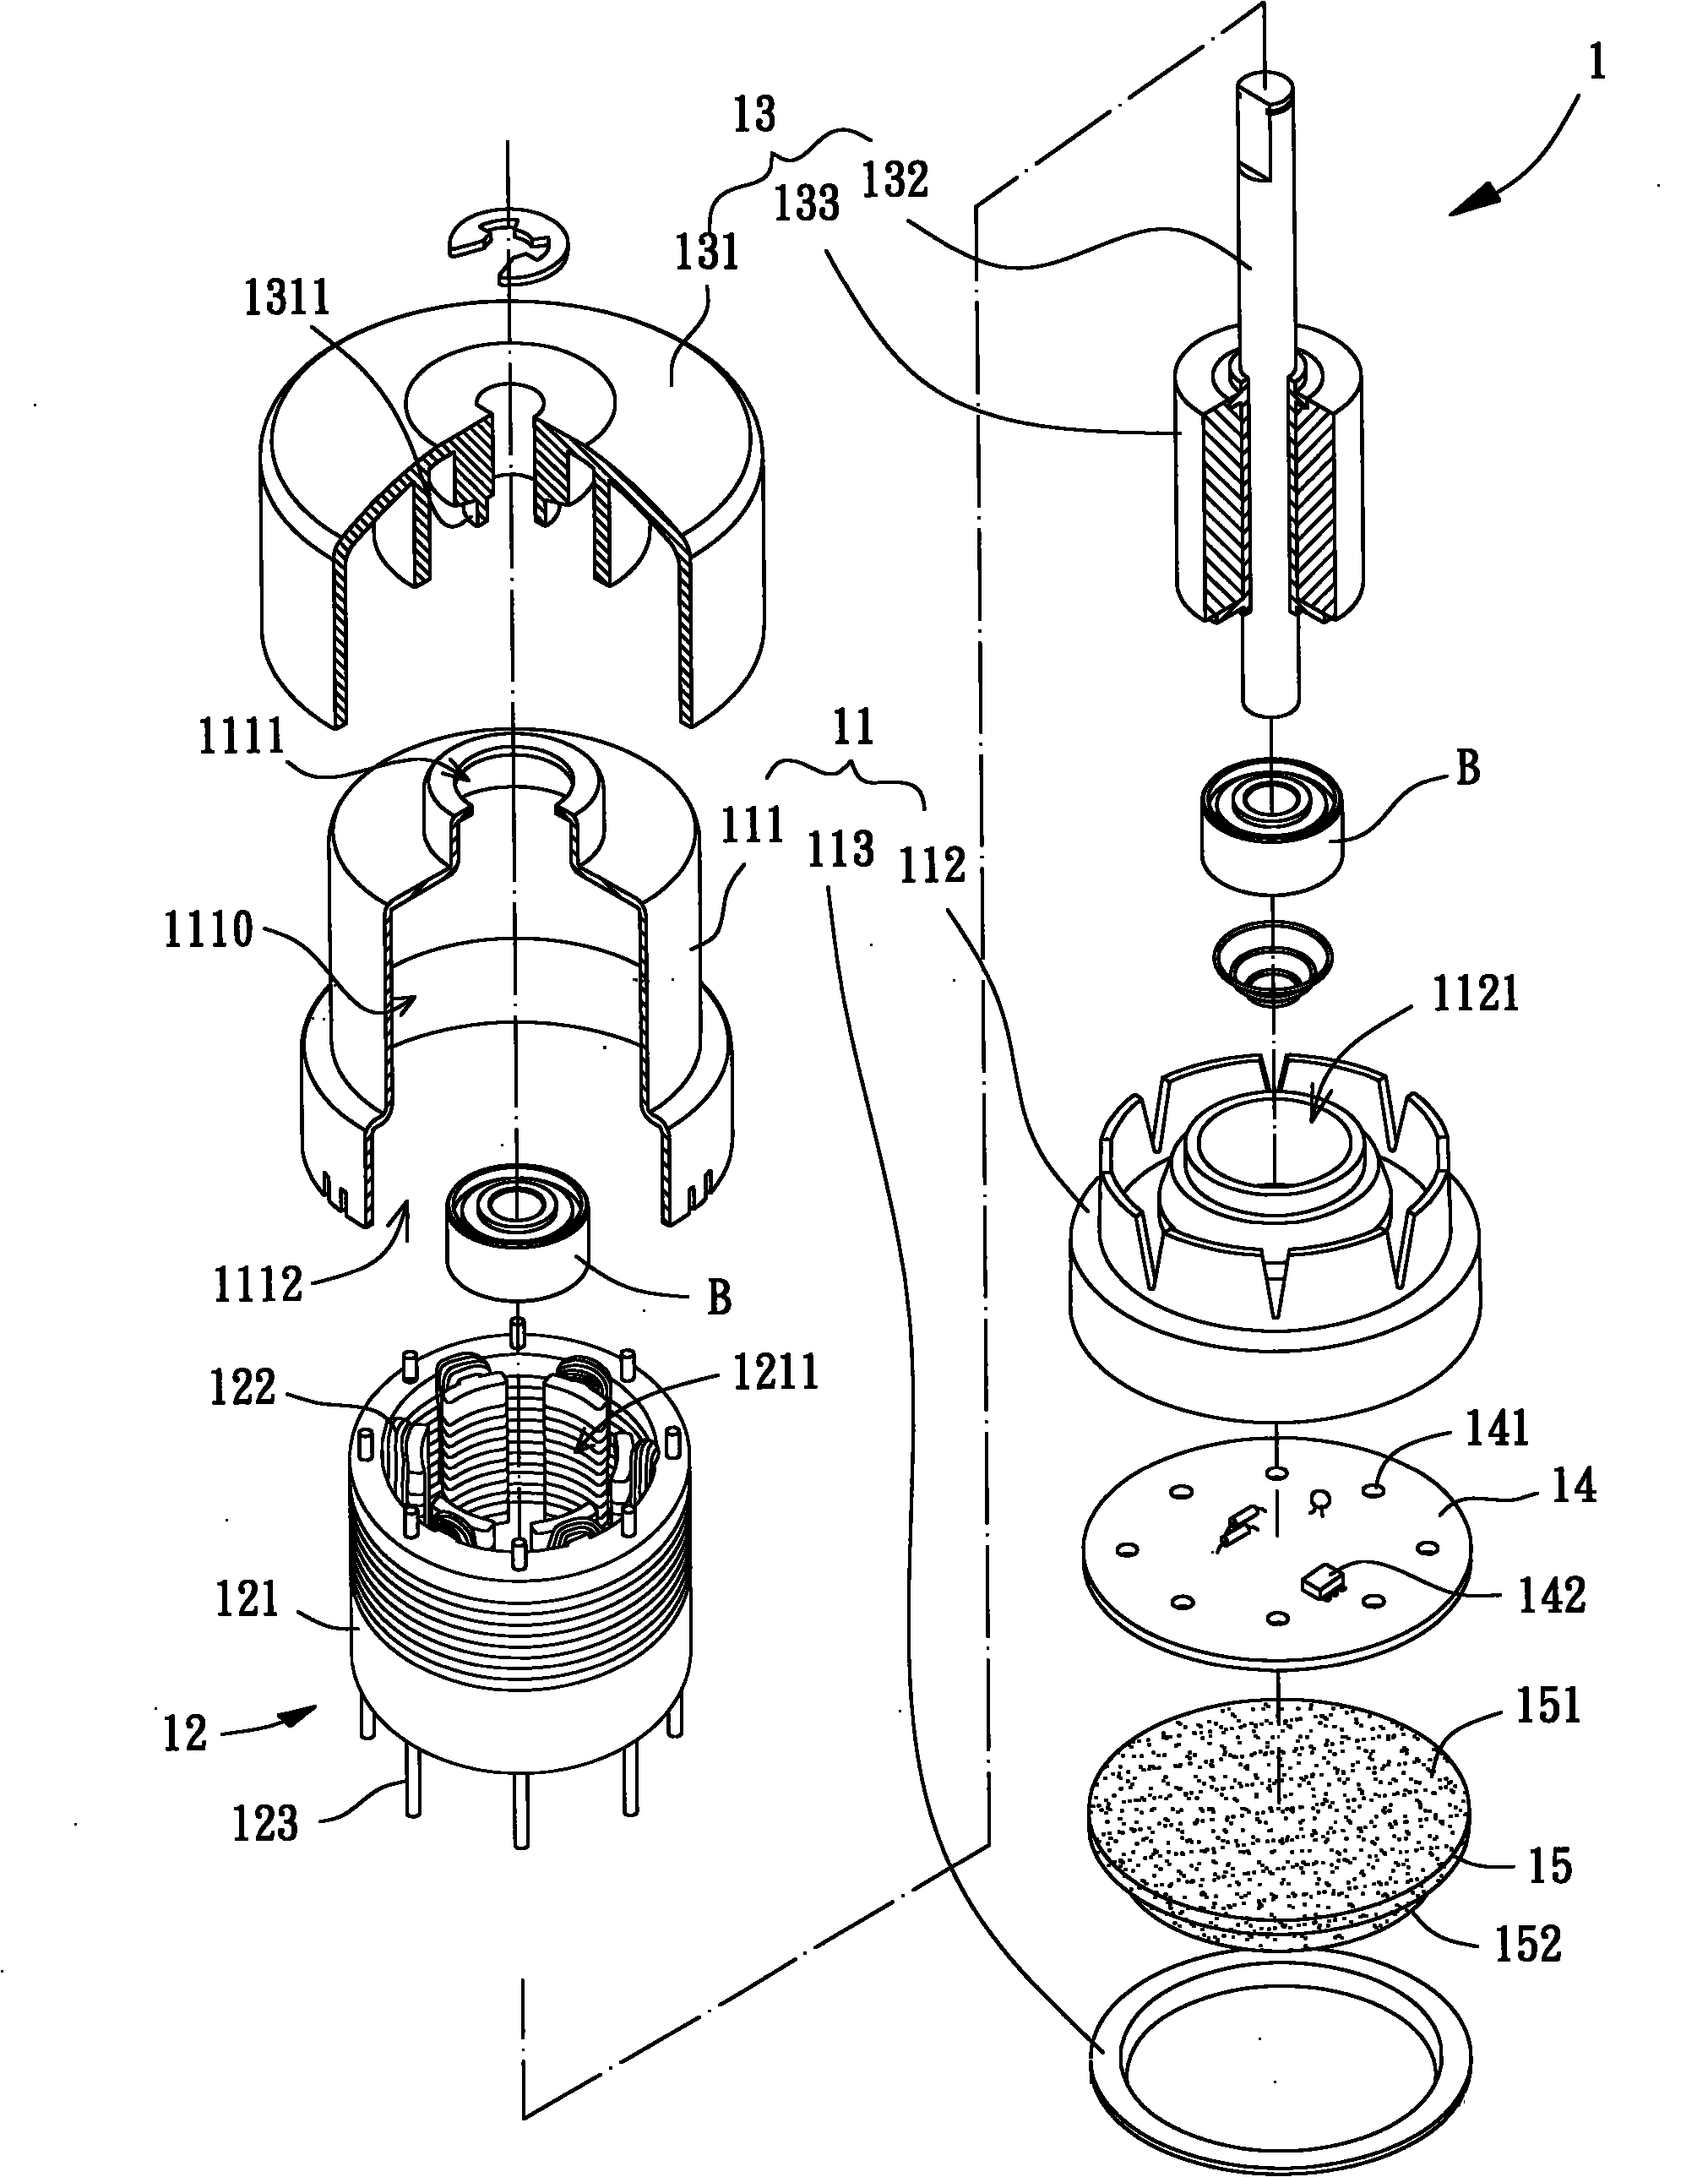 Motor and cooling fan provided with same